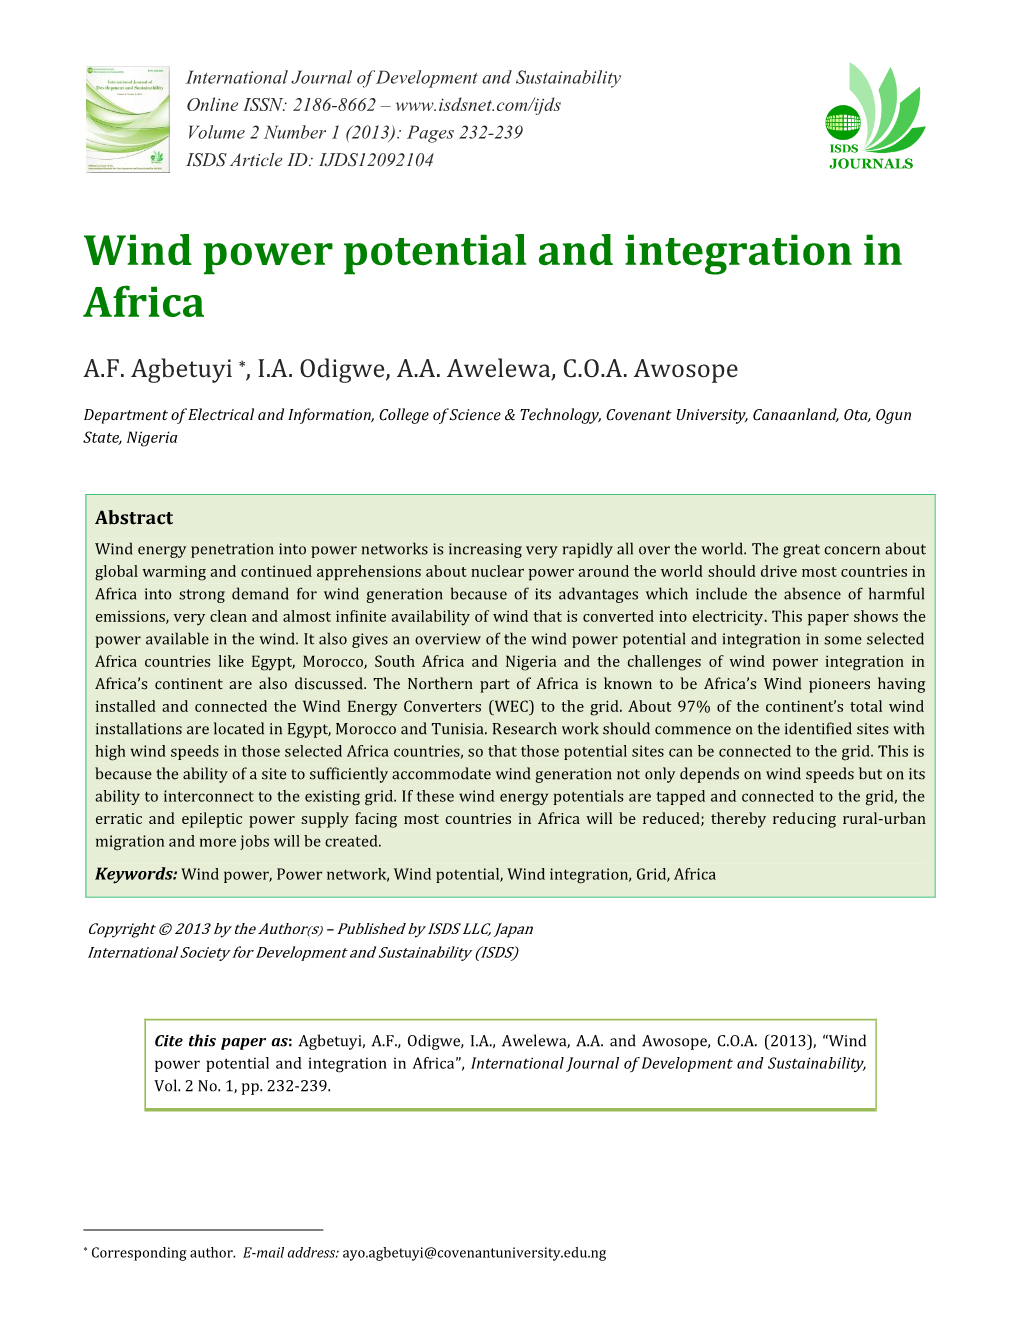 Wind Power Potential and Integration in Africa